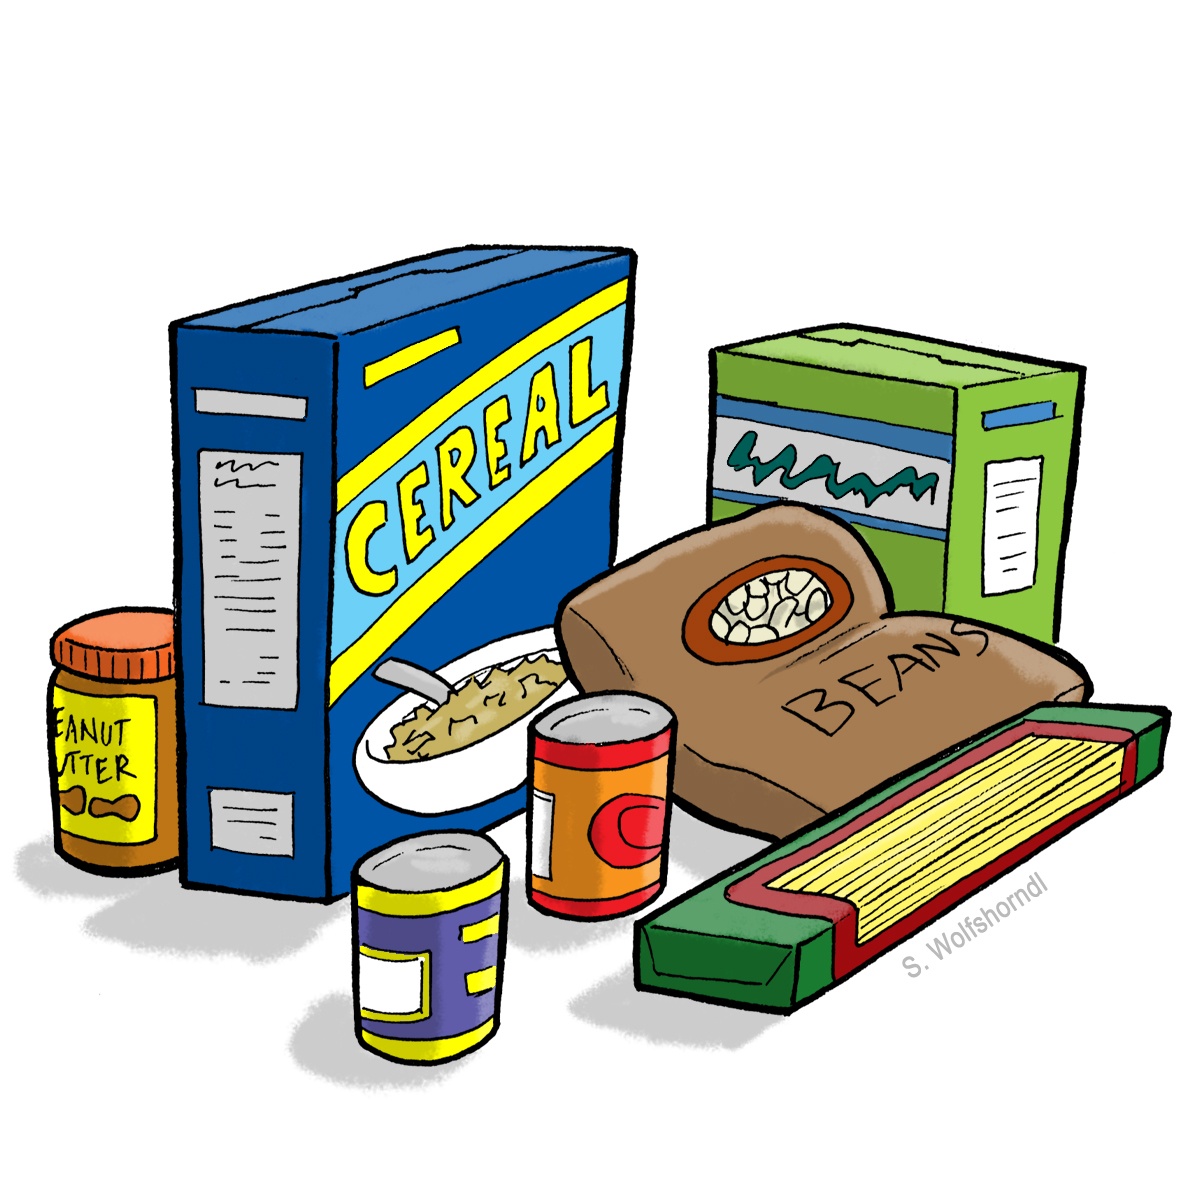 Canned Food Clipart Images Pi